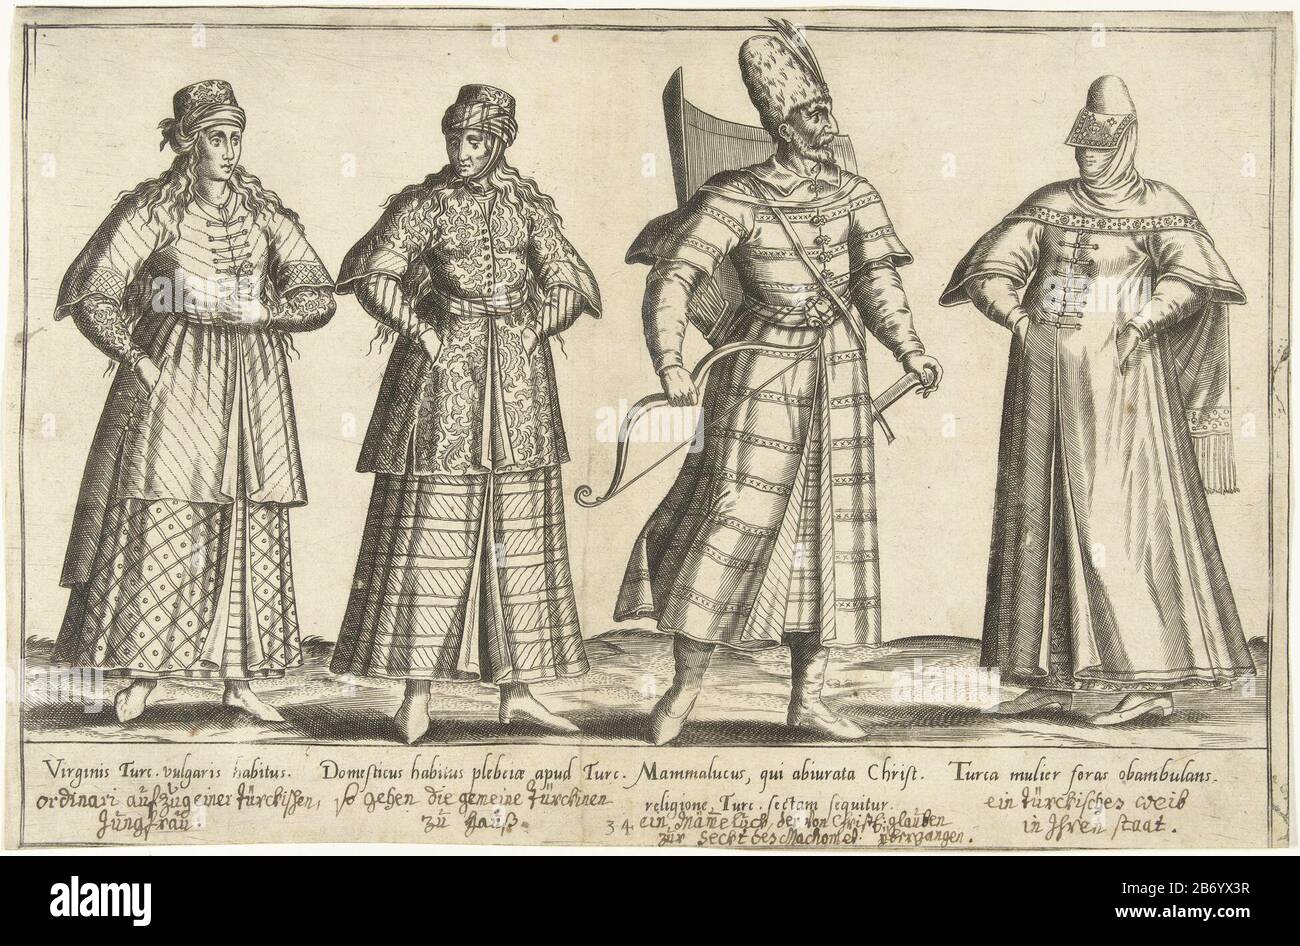 Kleding van Ottomanen rond 1580 Traditionele kleding van over de hele  wereld rond 1580 (serietitel) Print out a book about sixteenth century  clothing around 1580. Three women and a man of Ottoman